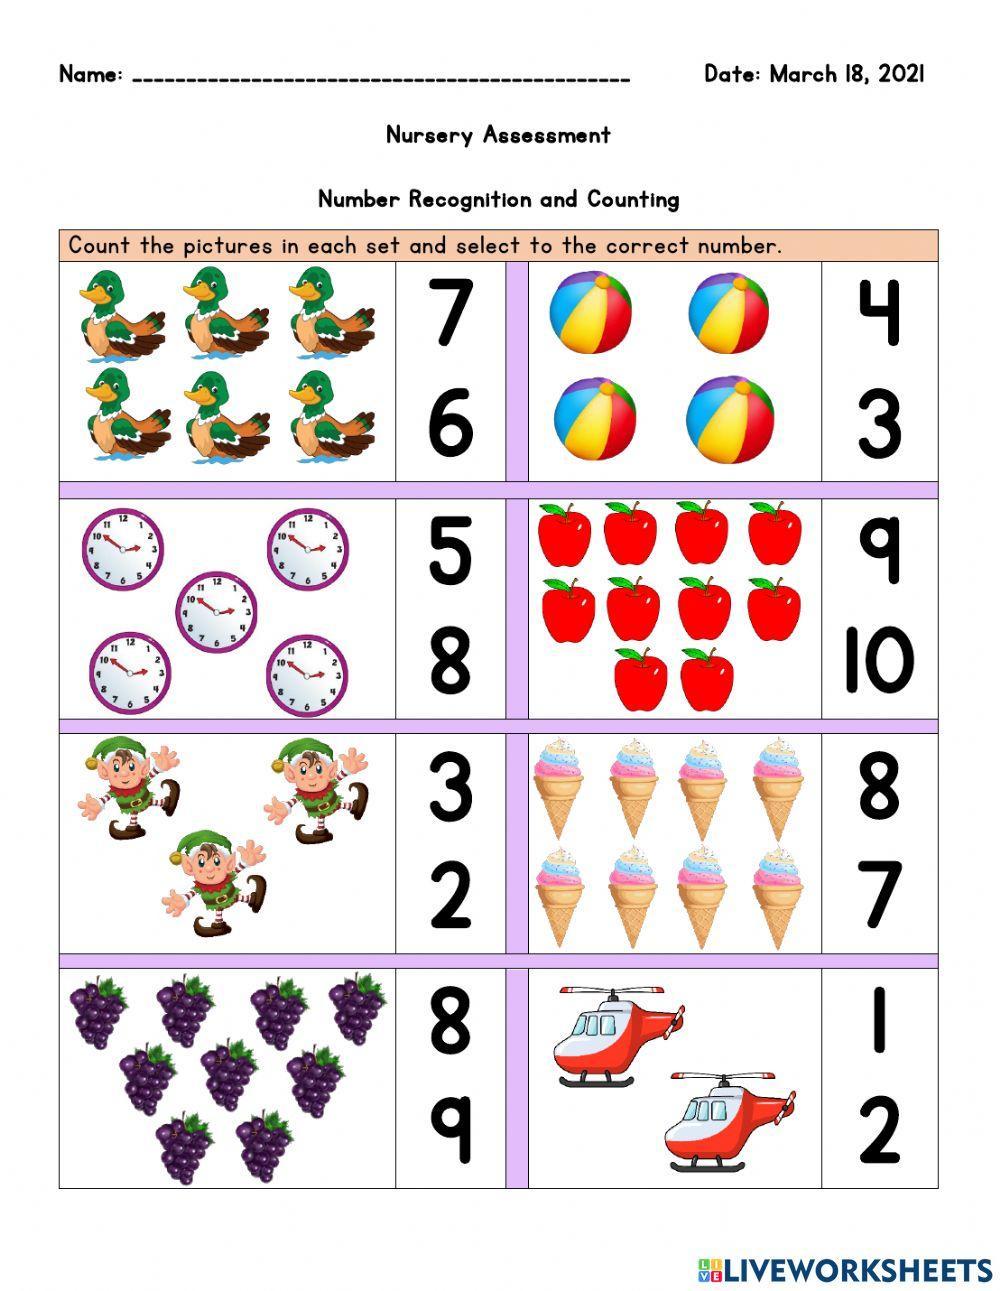 Nursery Assessment- Numbers and Counting